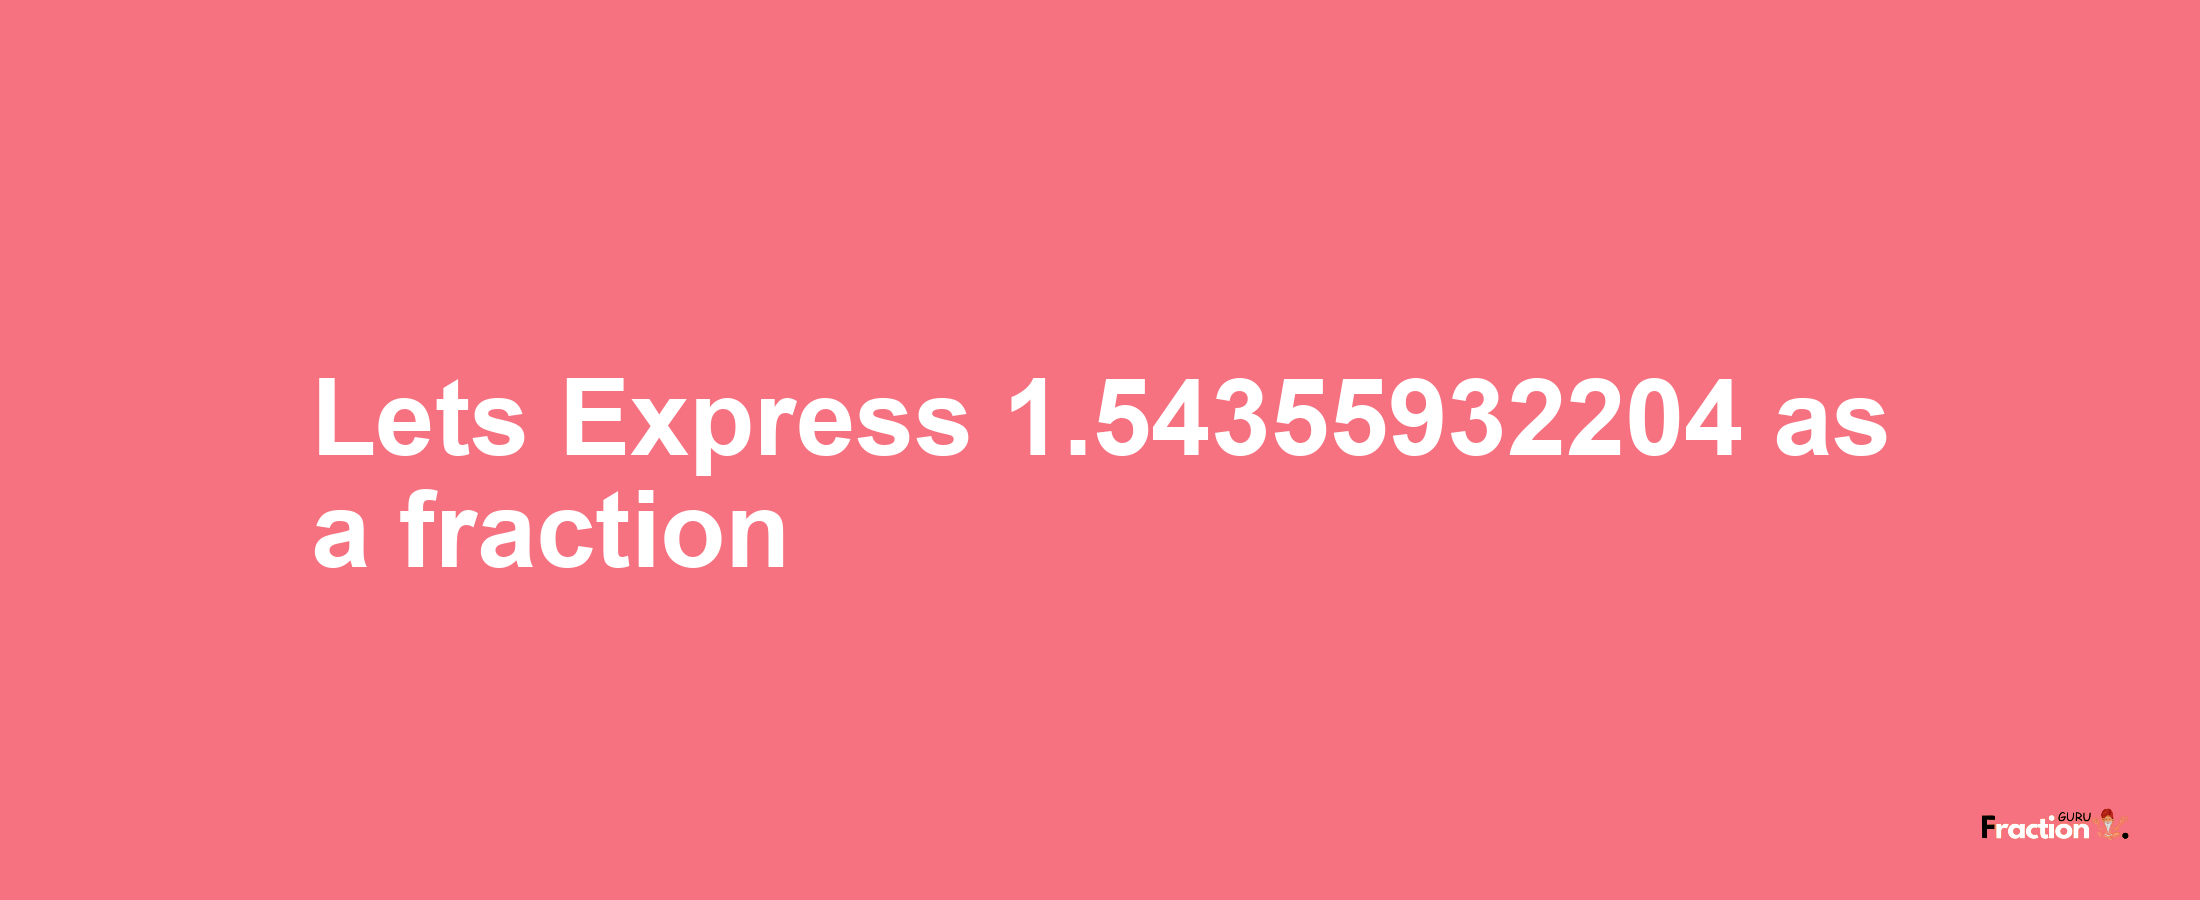 Lets Express 1.54355932204 as afraction